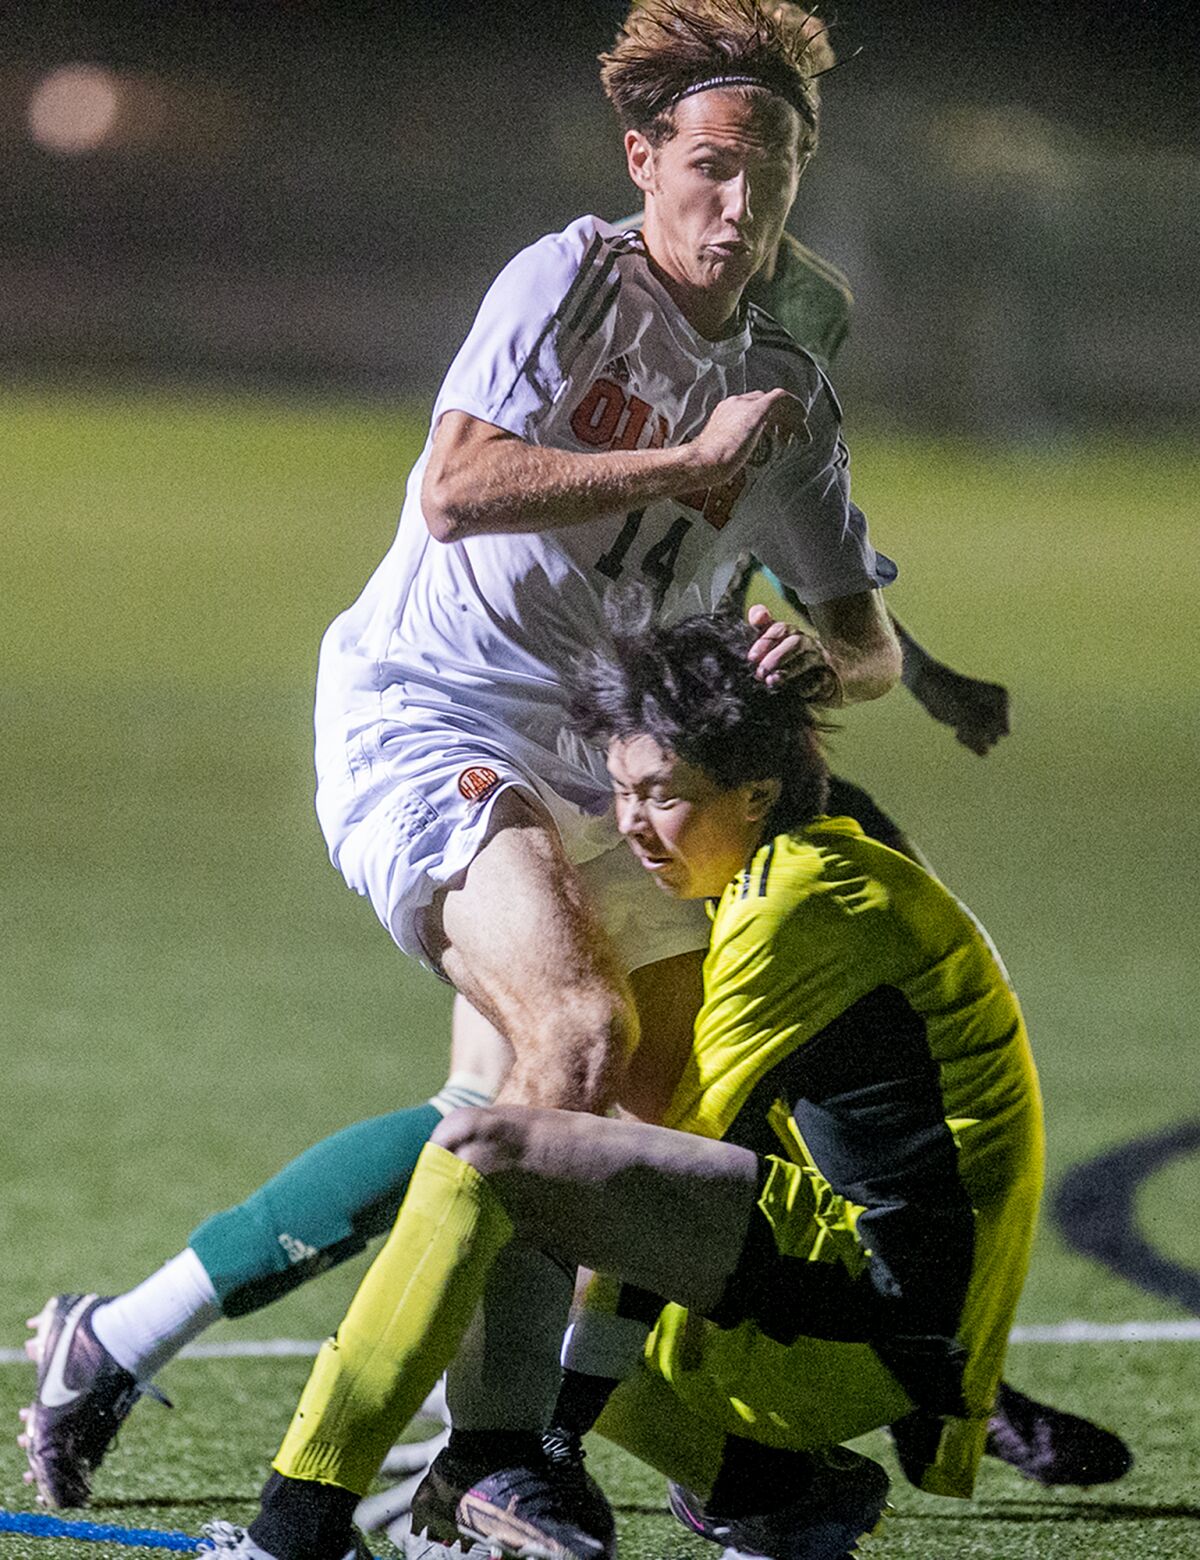 Huntington Beach's Hayden Kenny collides with Edison goalkeeper Dylan Dwight during a Surf League match on Wednesday.